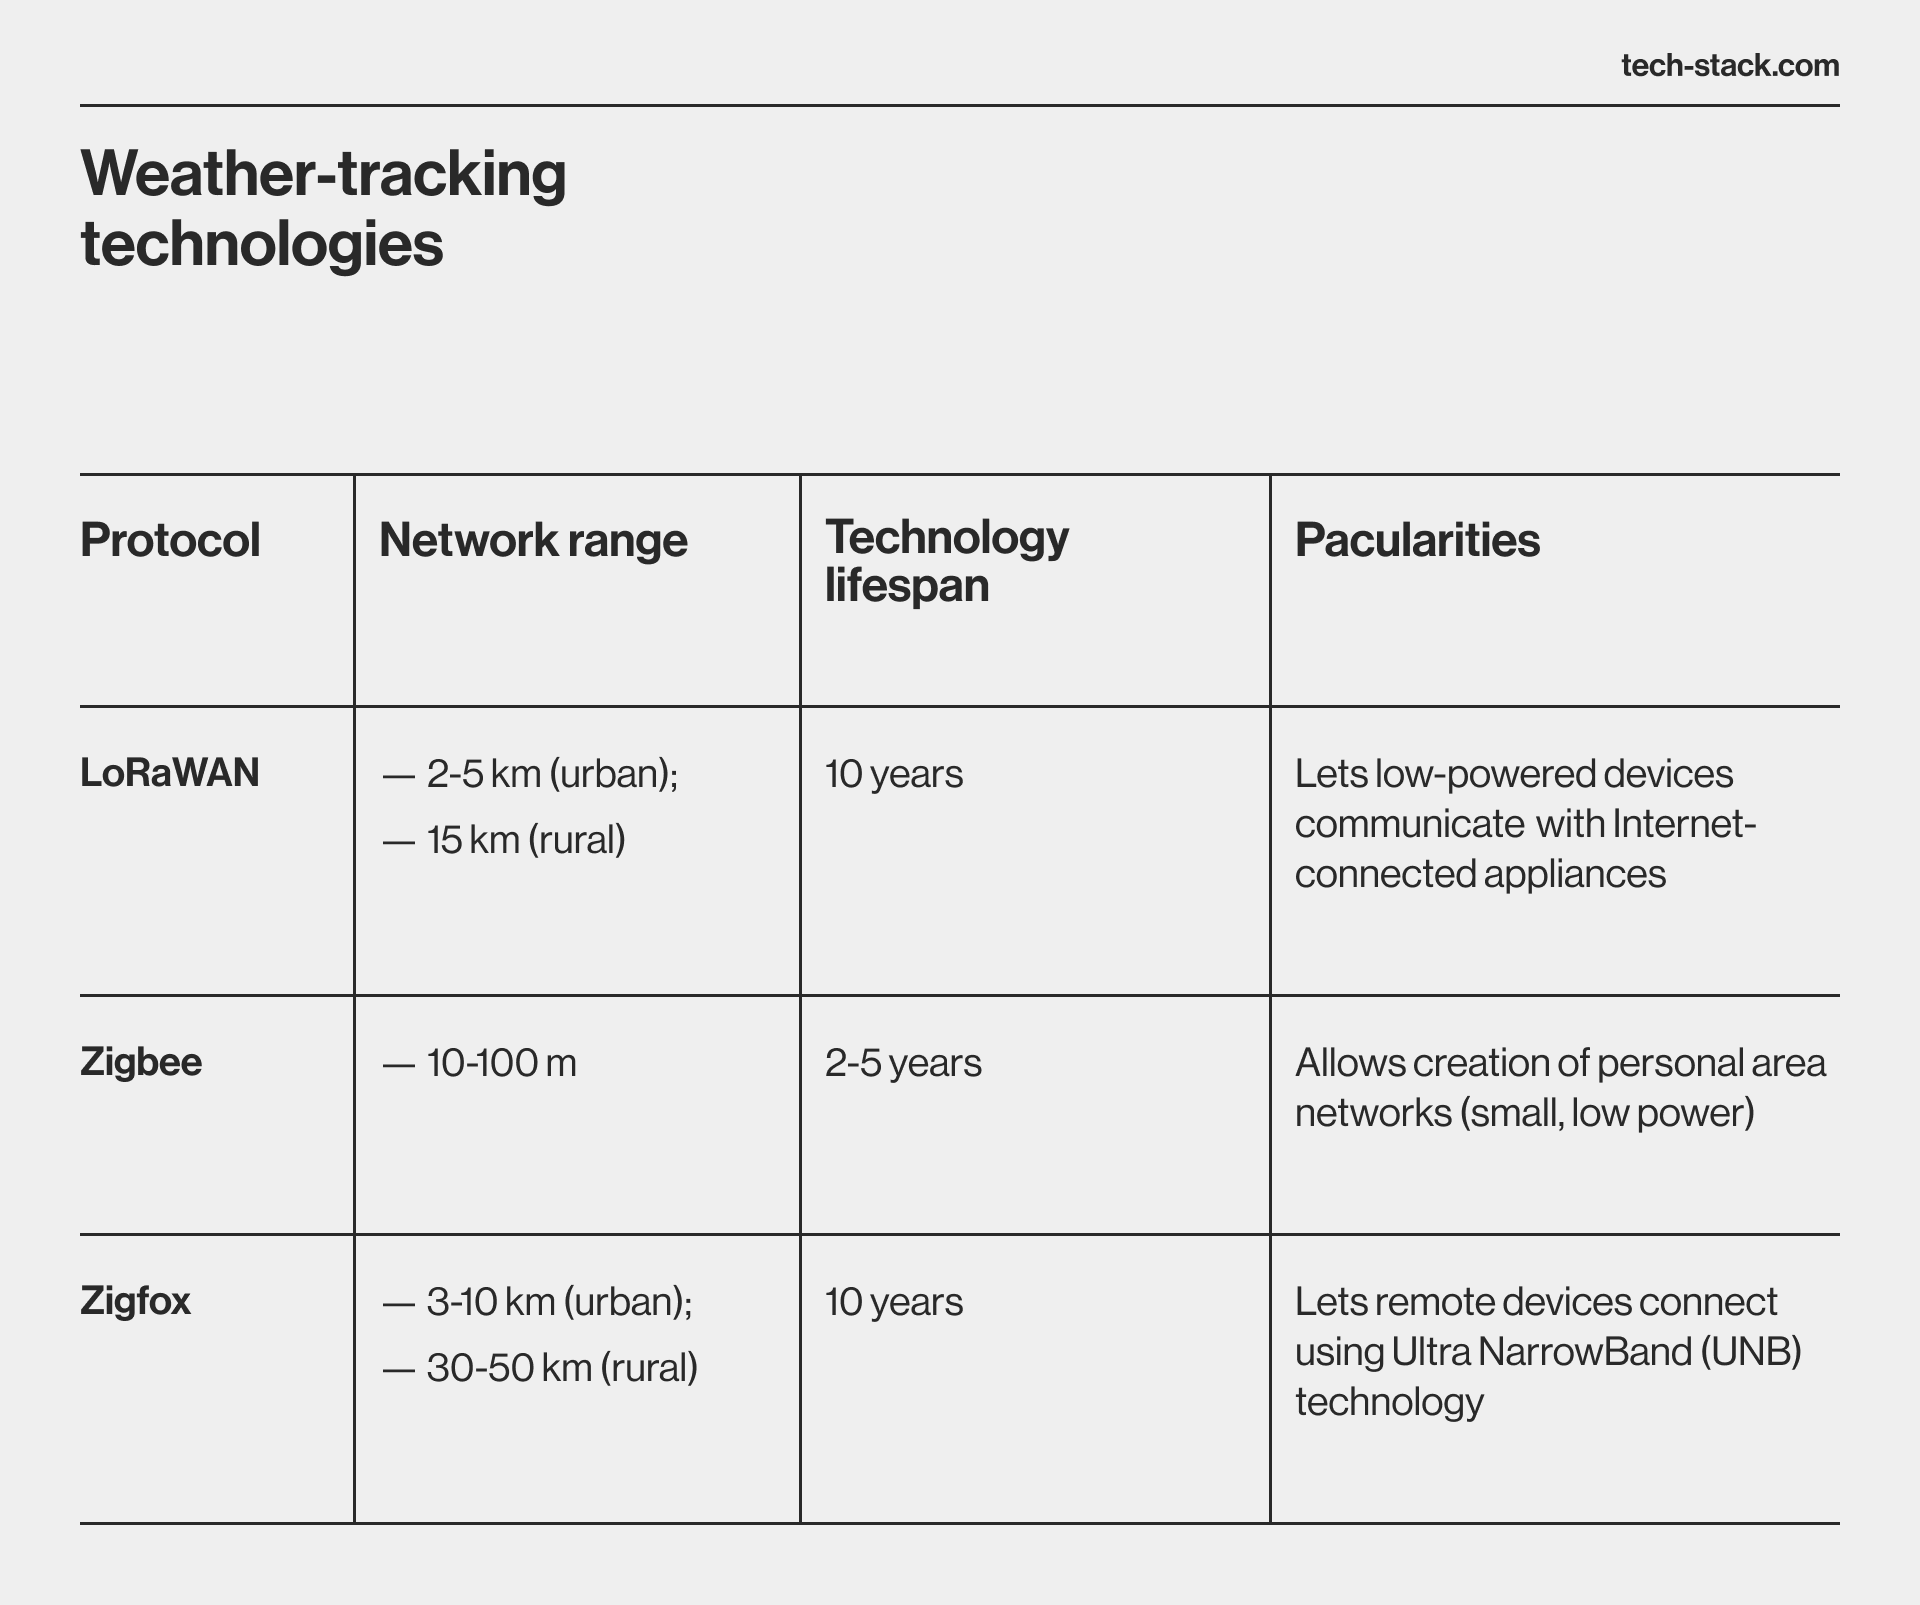 Weather-tracking technologies